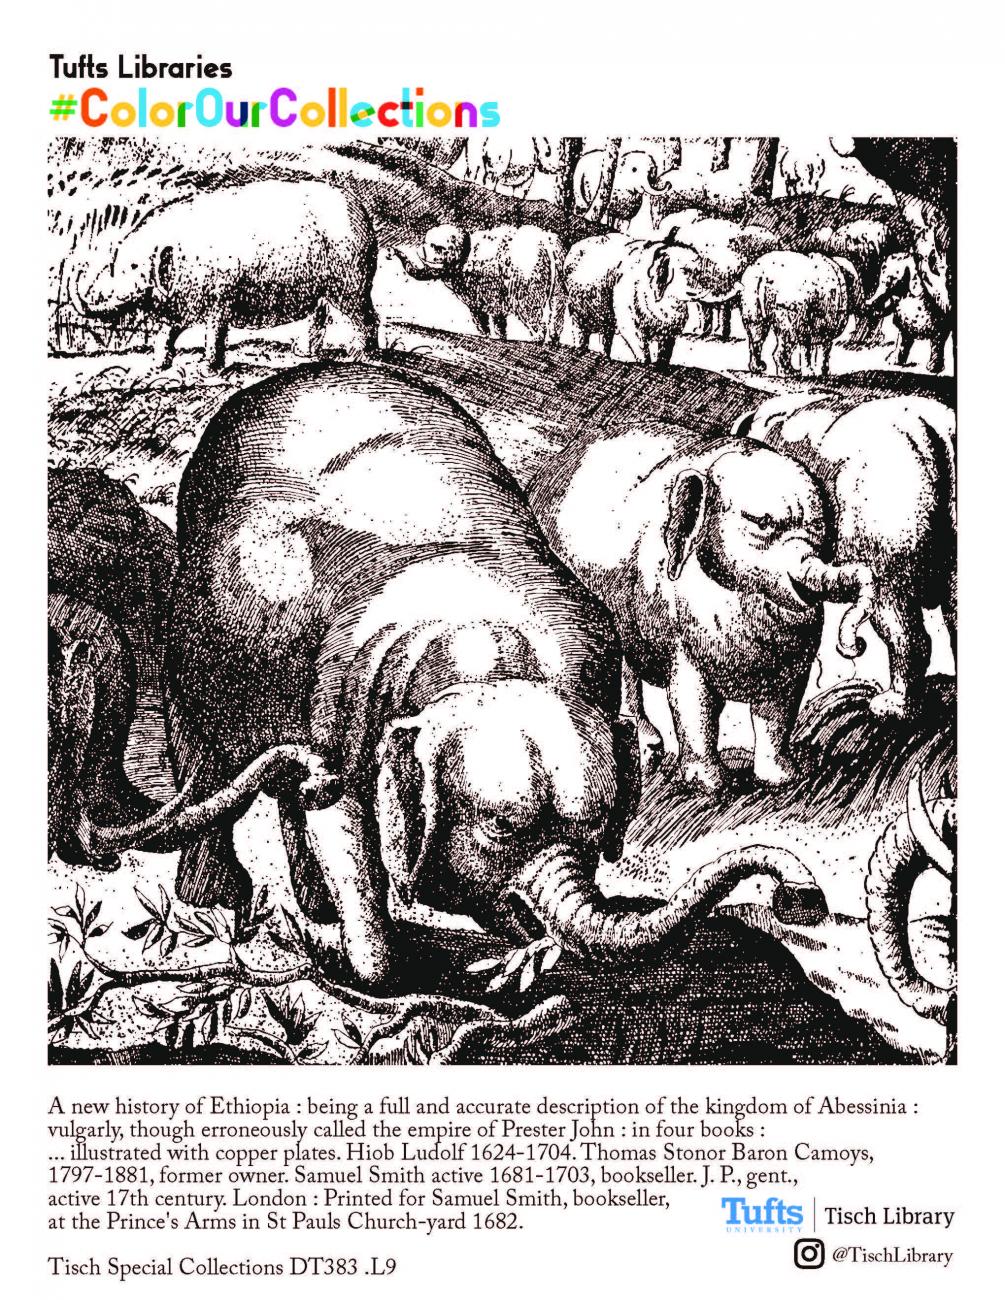 Page from the coloring book with a b&w illustration of elephants